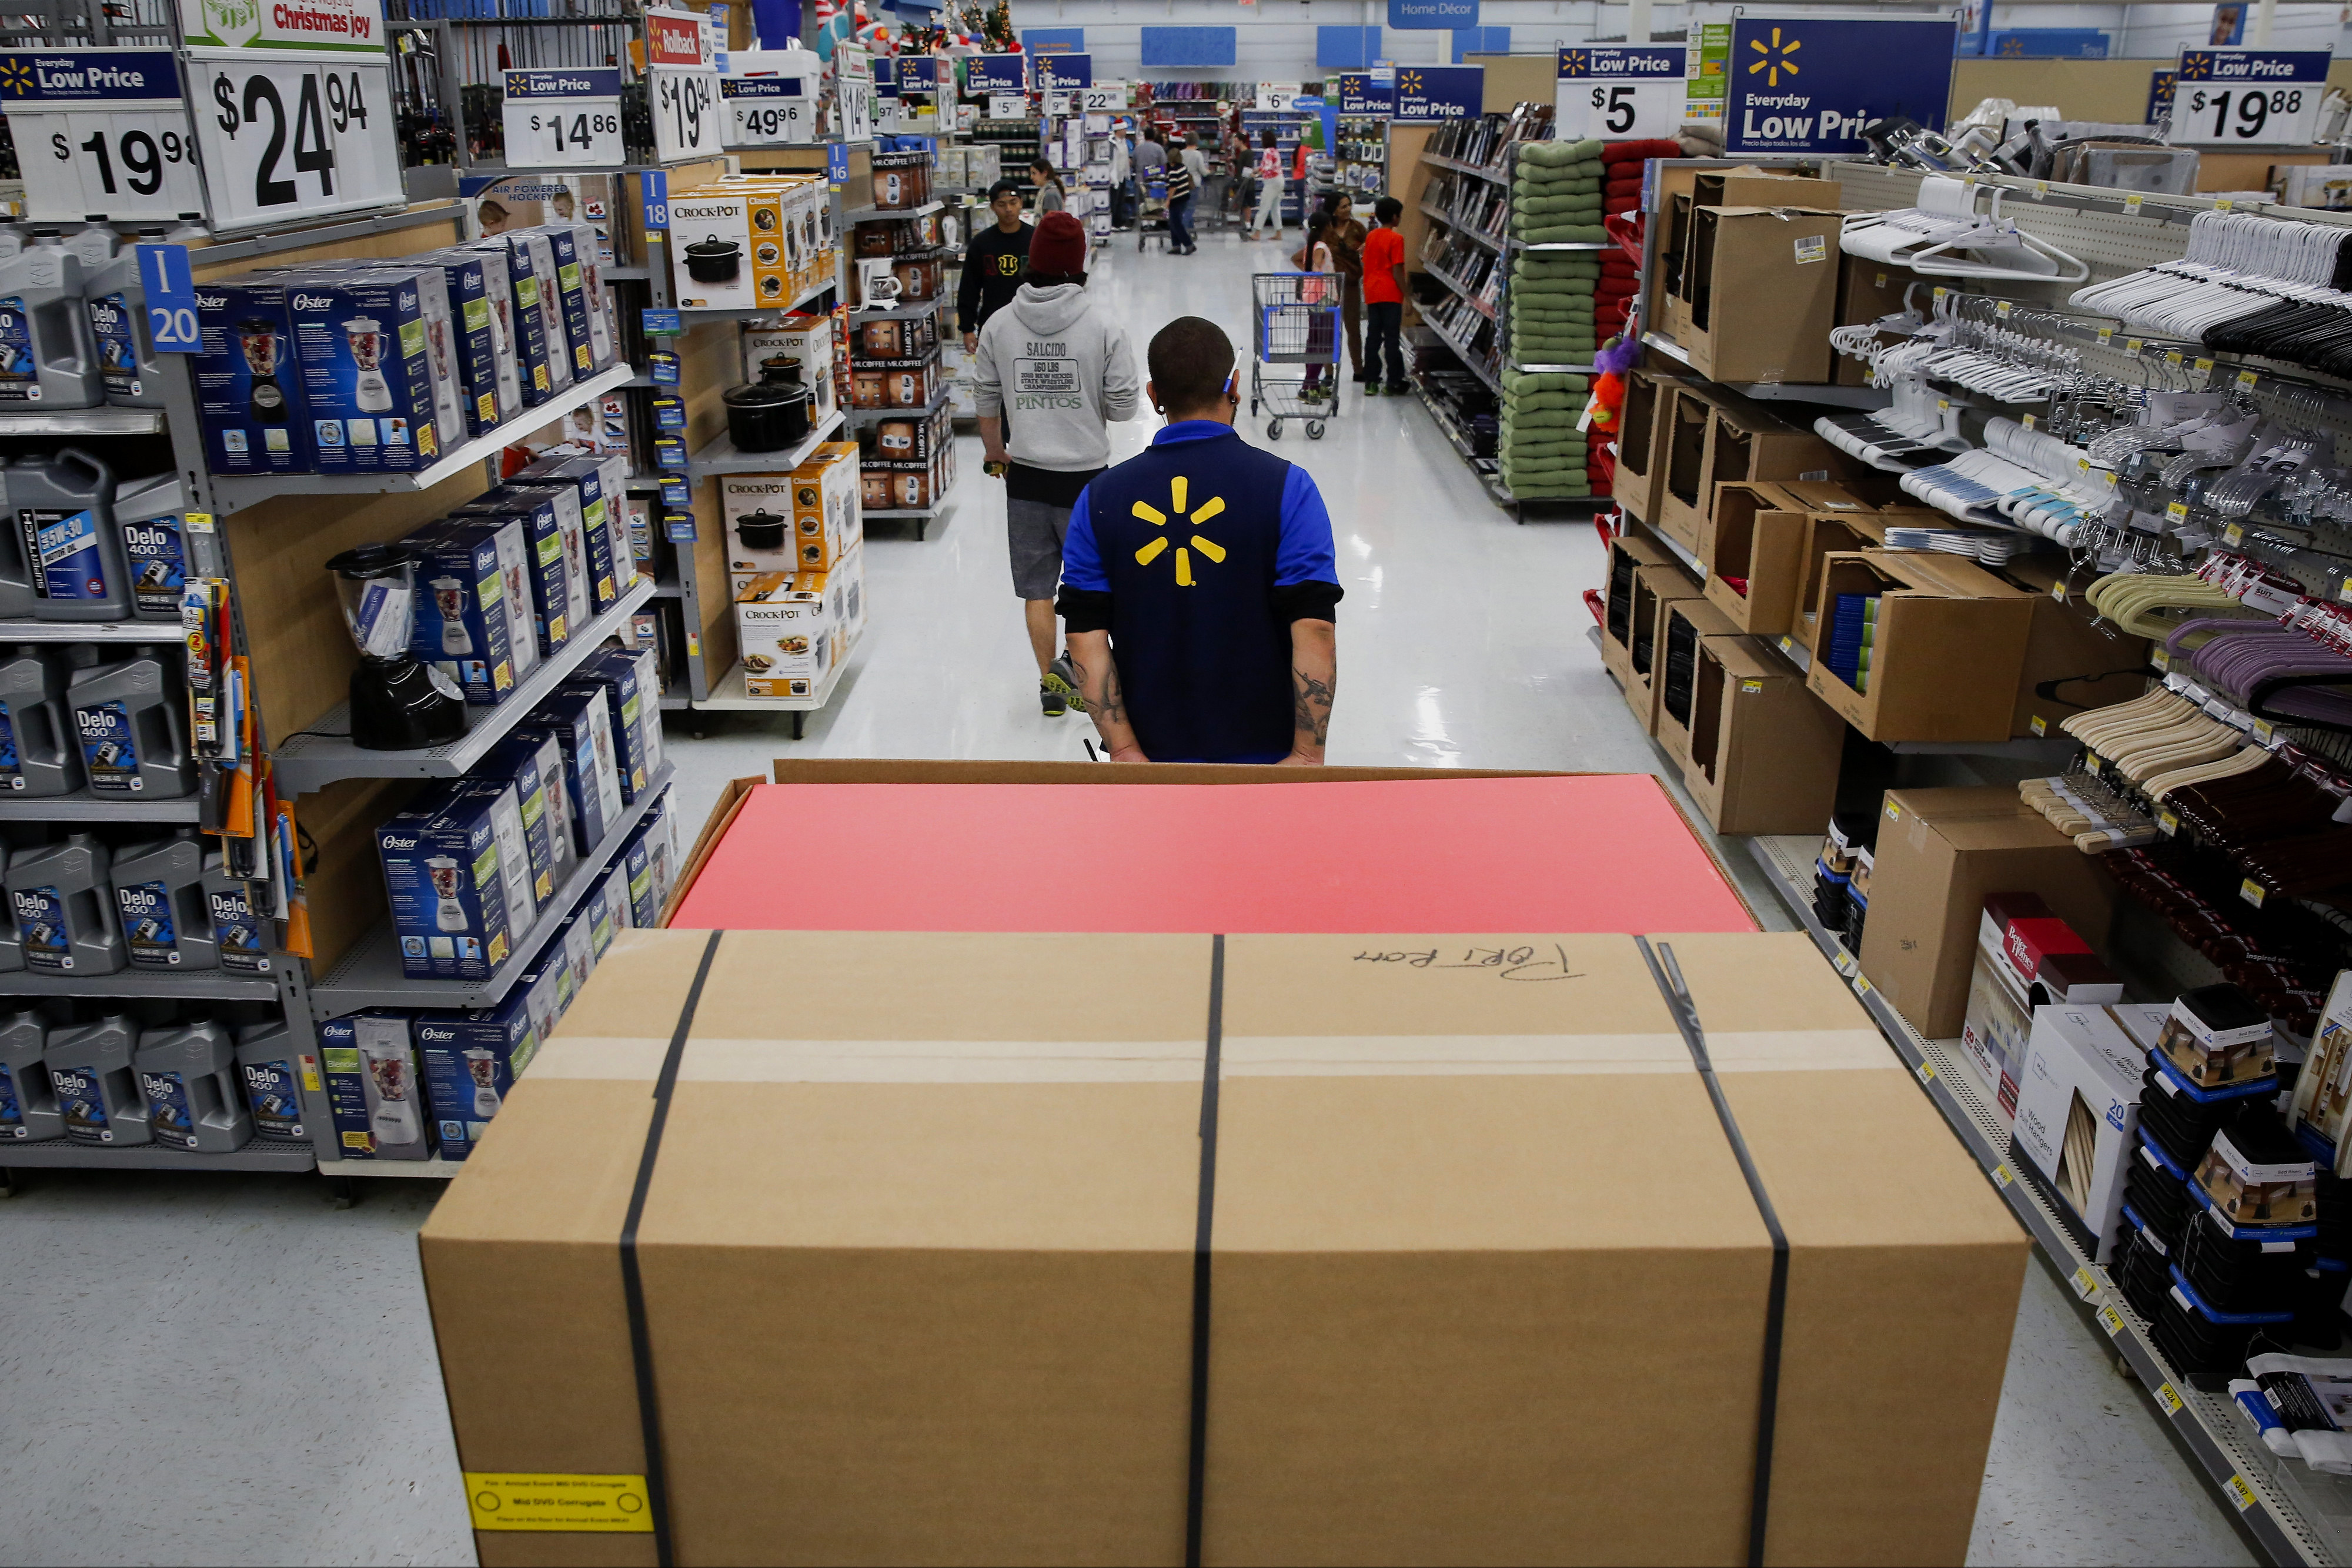 An employee pulls a forklift with display units for DVD movies at a Wal-Mart Stores Inc. location ahead of Black Friday in Los Angeles, Calif. on Nov. 24, 2014. (Bloomberg—Getty Images)